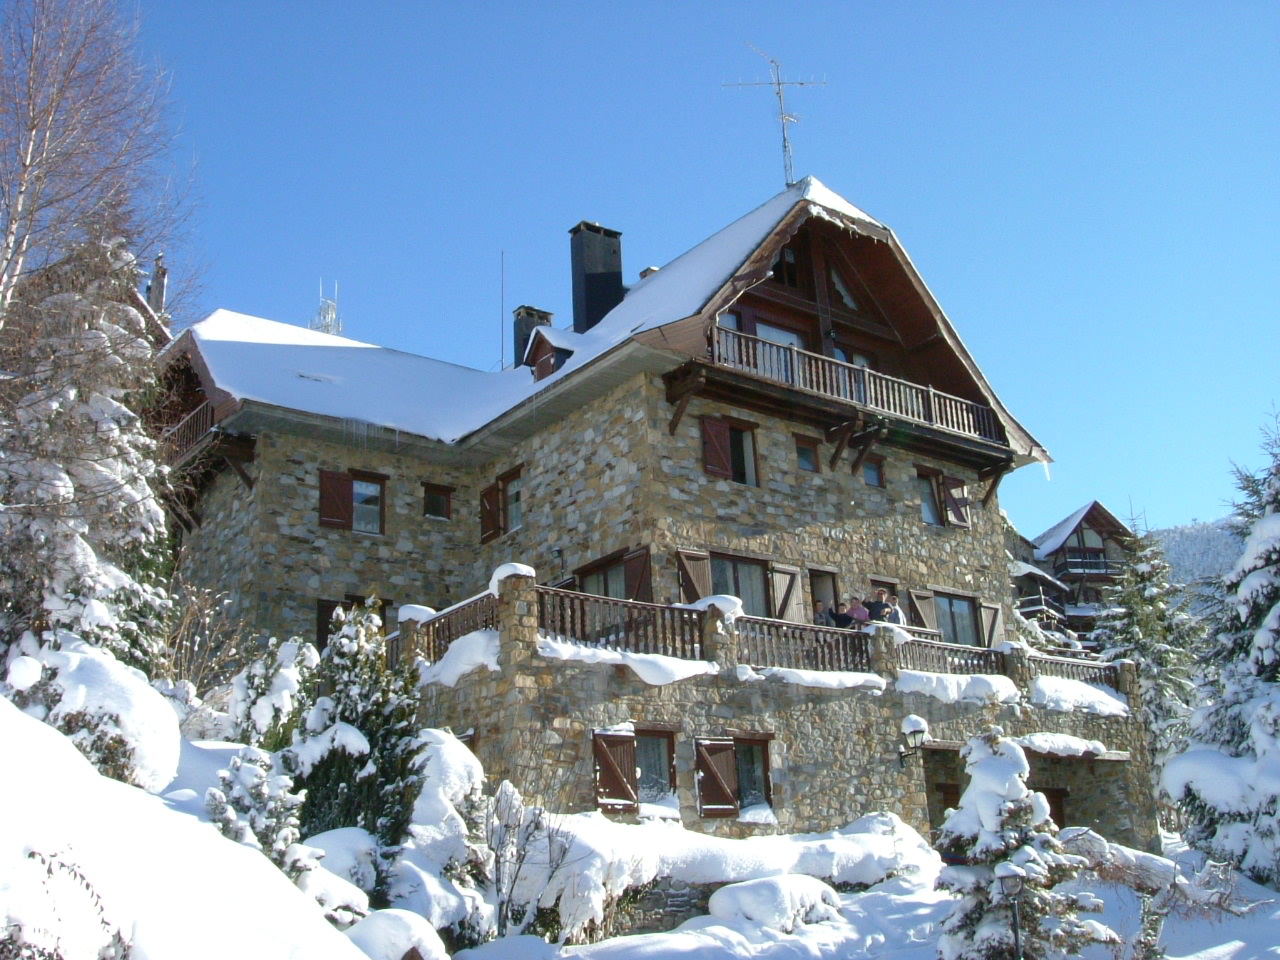 Chalet-Hotel Salana in Baqueira